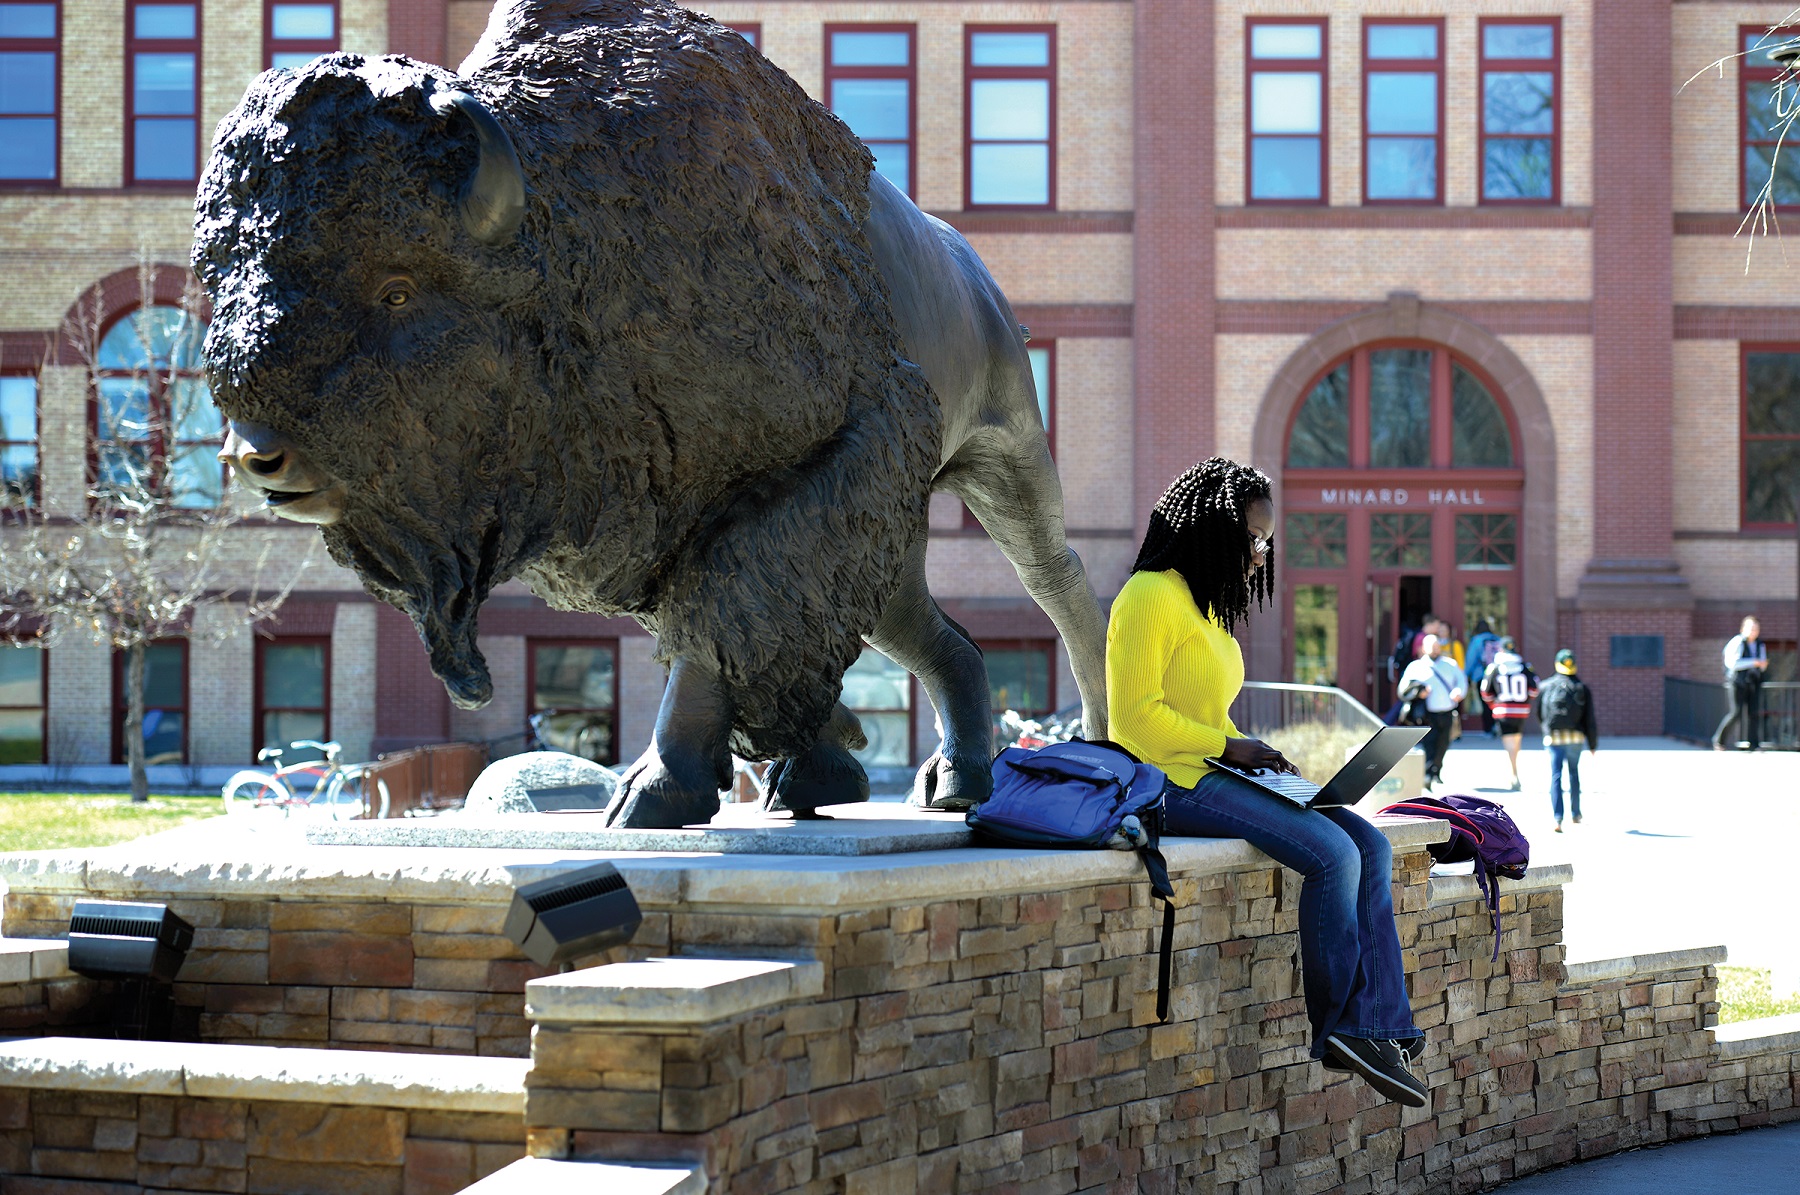 4/13/16 – Student studying outside at the Bison Statue.